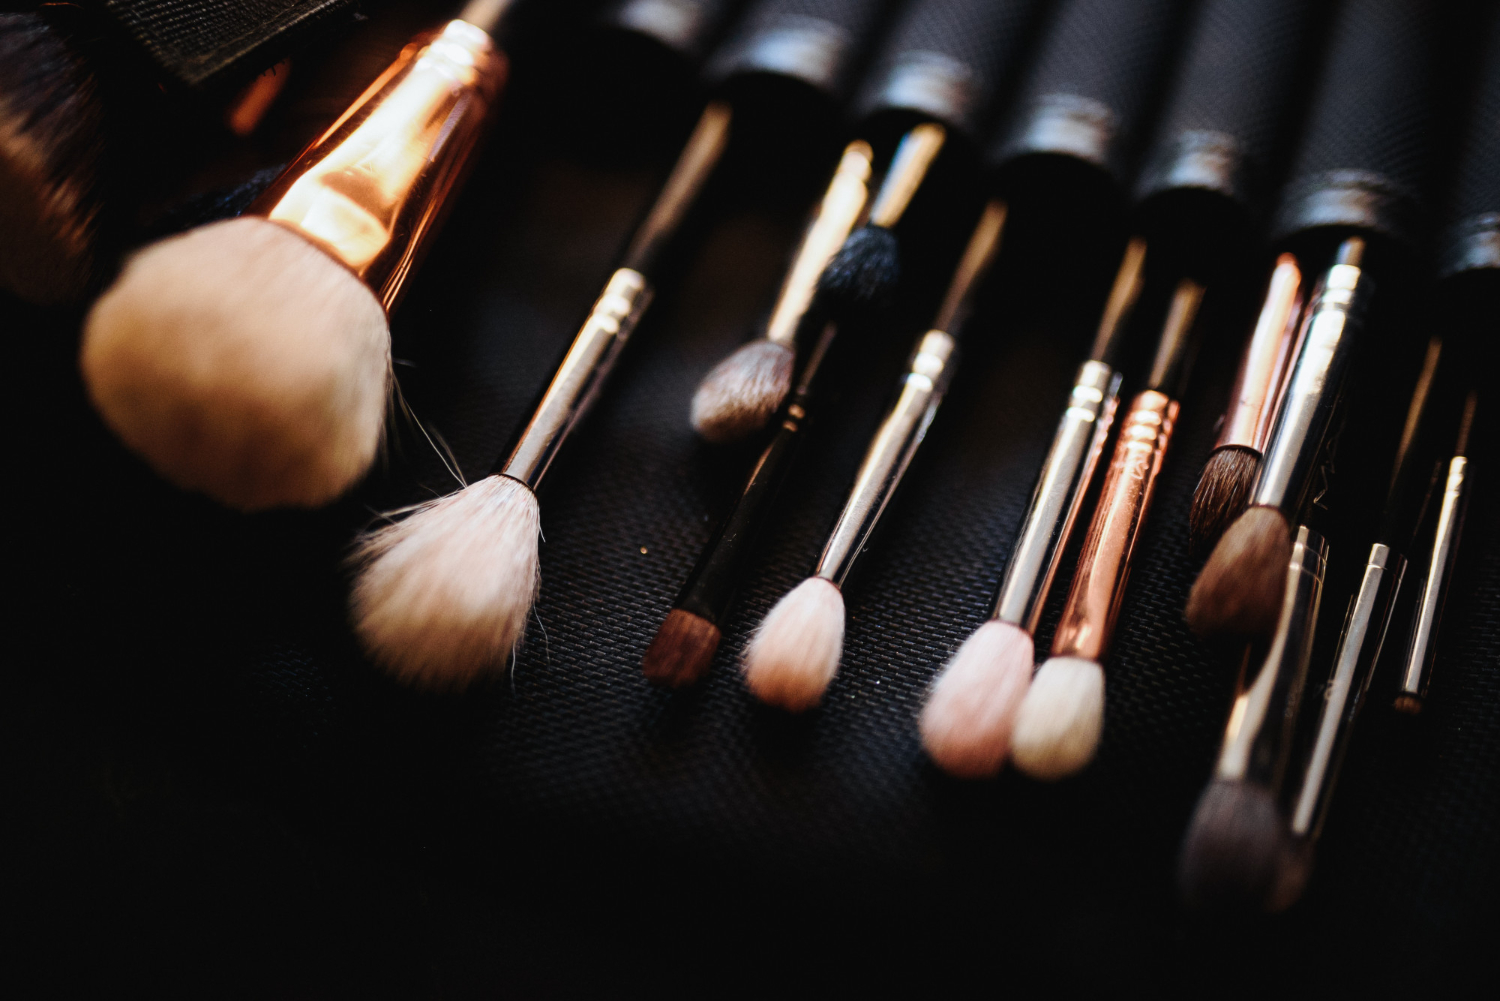 How to make your beauty routine more sustainable